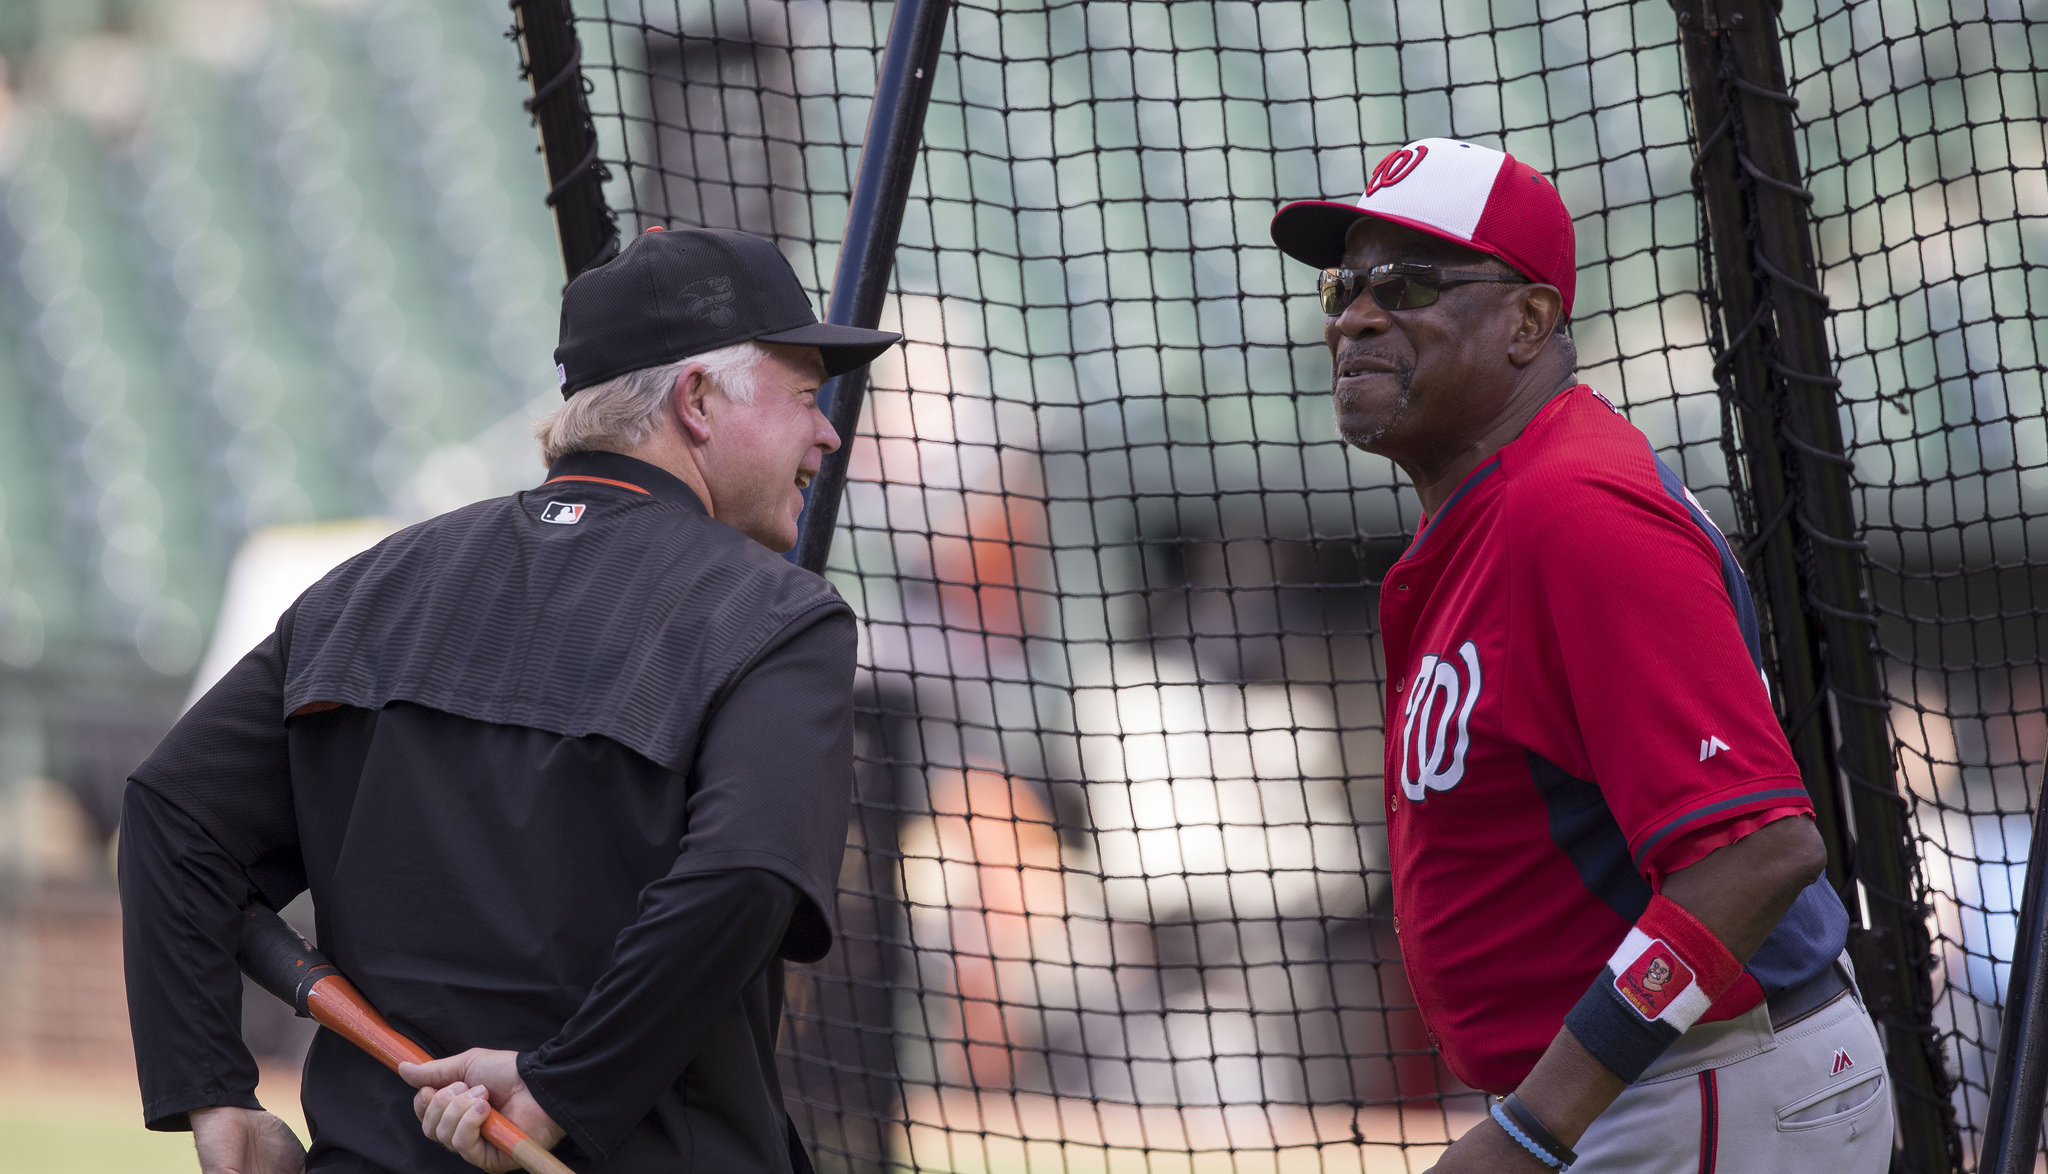 Managers Buck Showalter of the Baltimore Orioles and Dusty Baker of the Washington Nationals talk during batting practice before a game at Oriole Park at Camden Yards on August 22, 2016 in Baltimore, Maryland. Photo: Flickr/Keith Allison